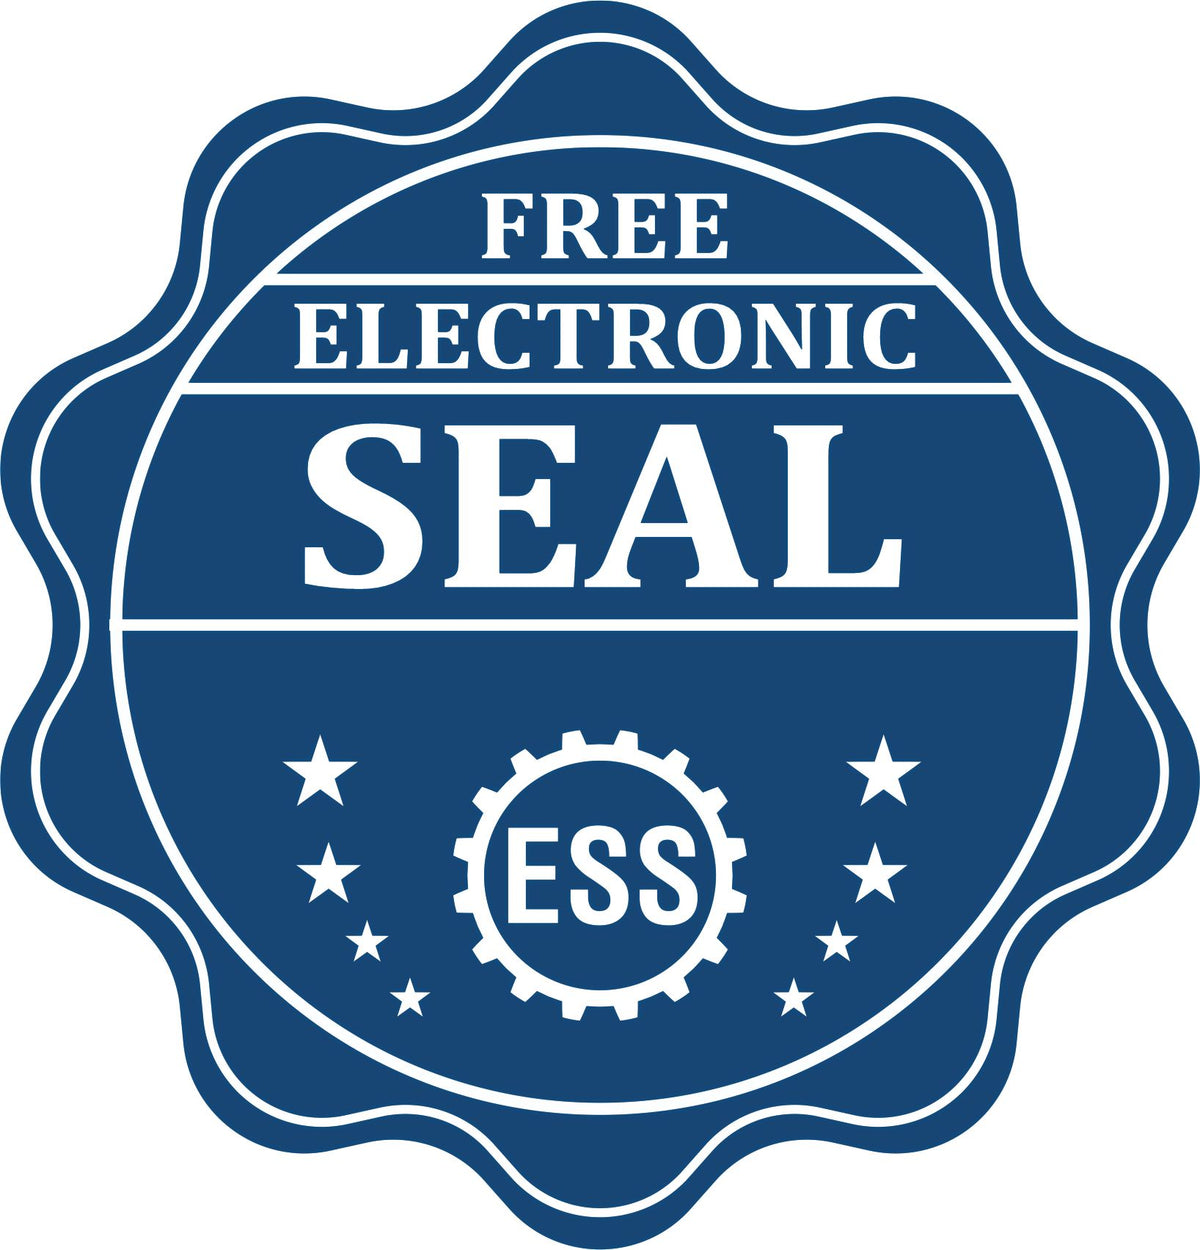 A badge showing a free electronic seal for the Handheld New Mexico Professional Geologist Embosser with stars and the ESS gear on the emblem.